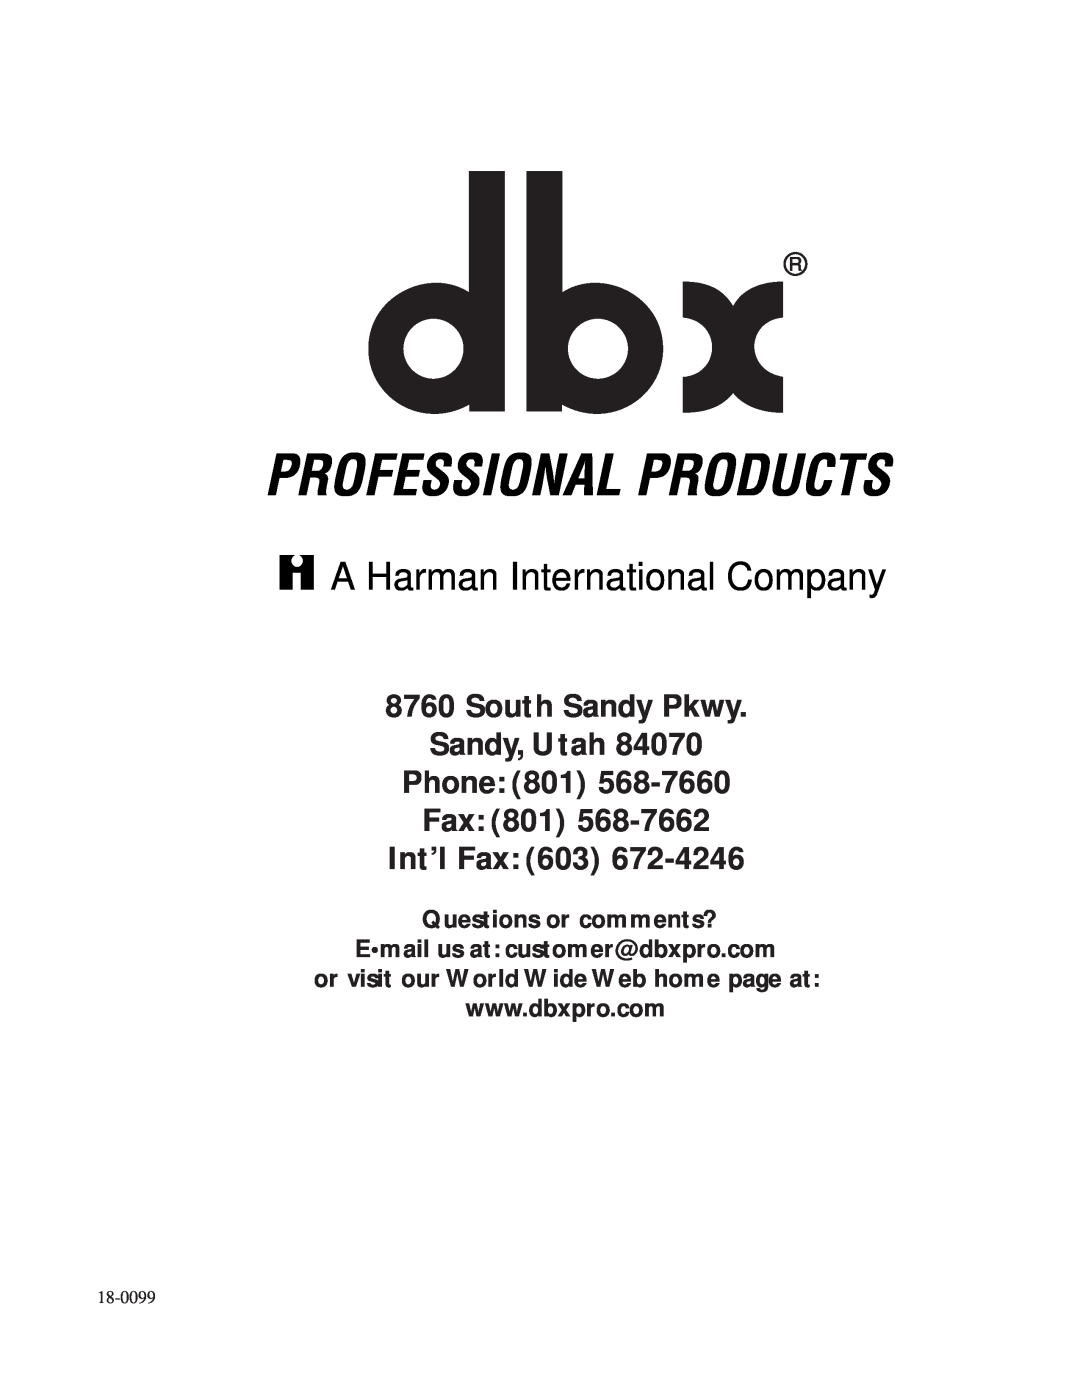 dbx Pro 376 South Sandy Pkwy Sandy, Utah Phone, Fax 801 Int’l Fax, Questions or comments?, A Harman International Company 